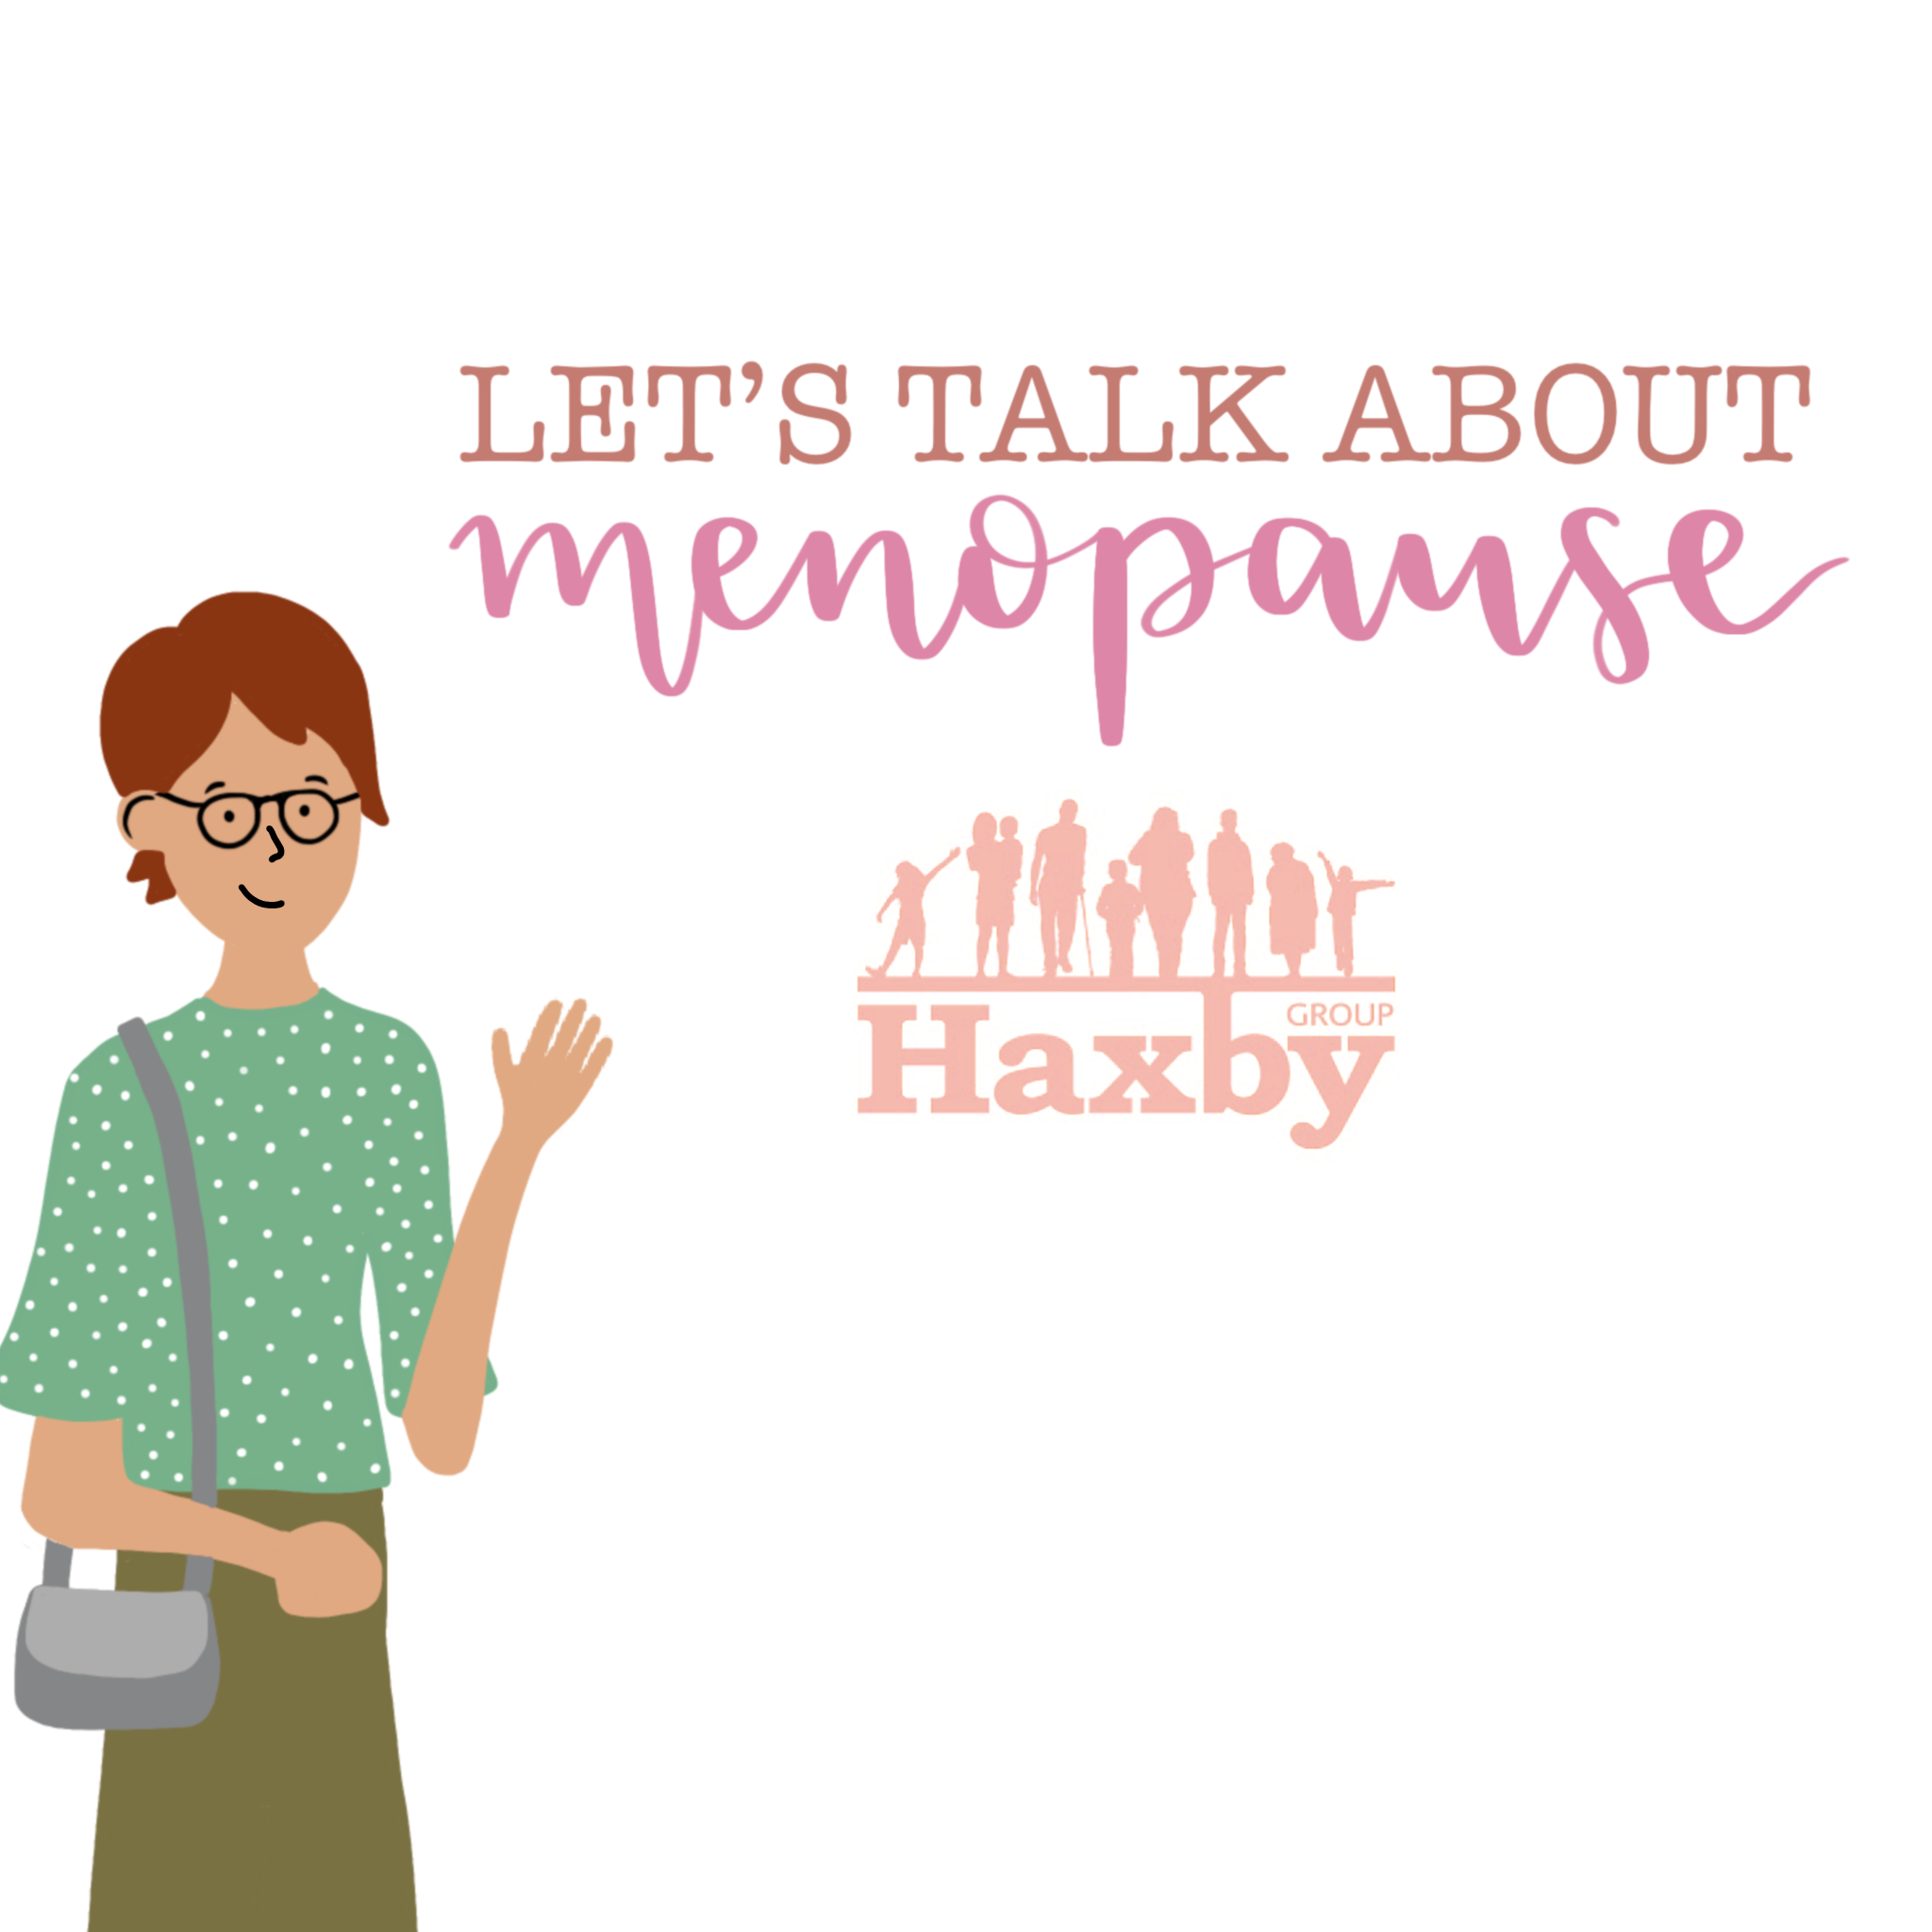 Lets Talk About Menopause Haxby Group